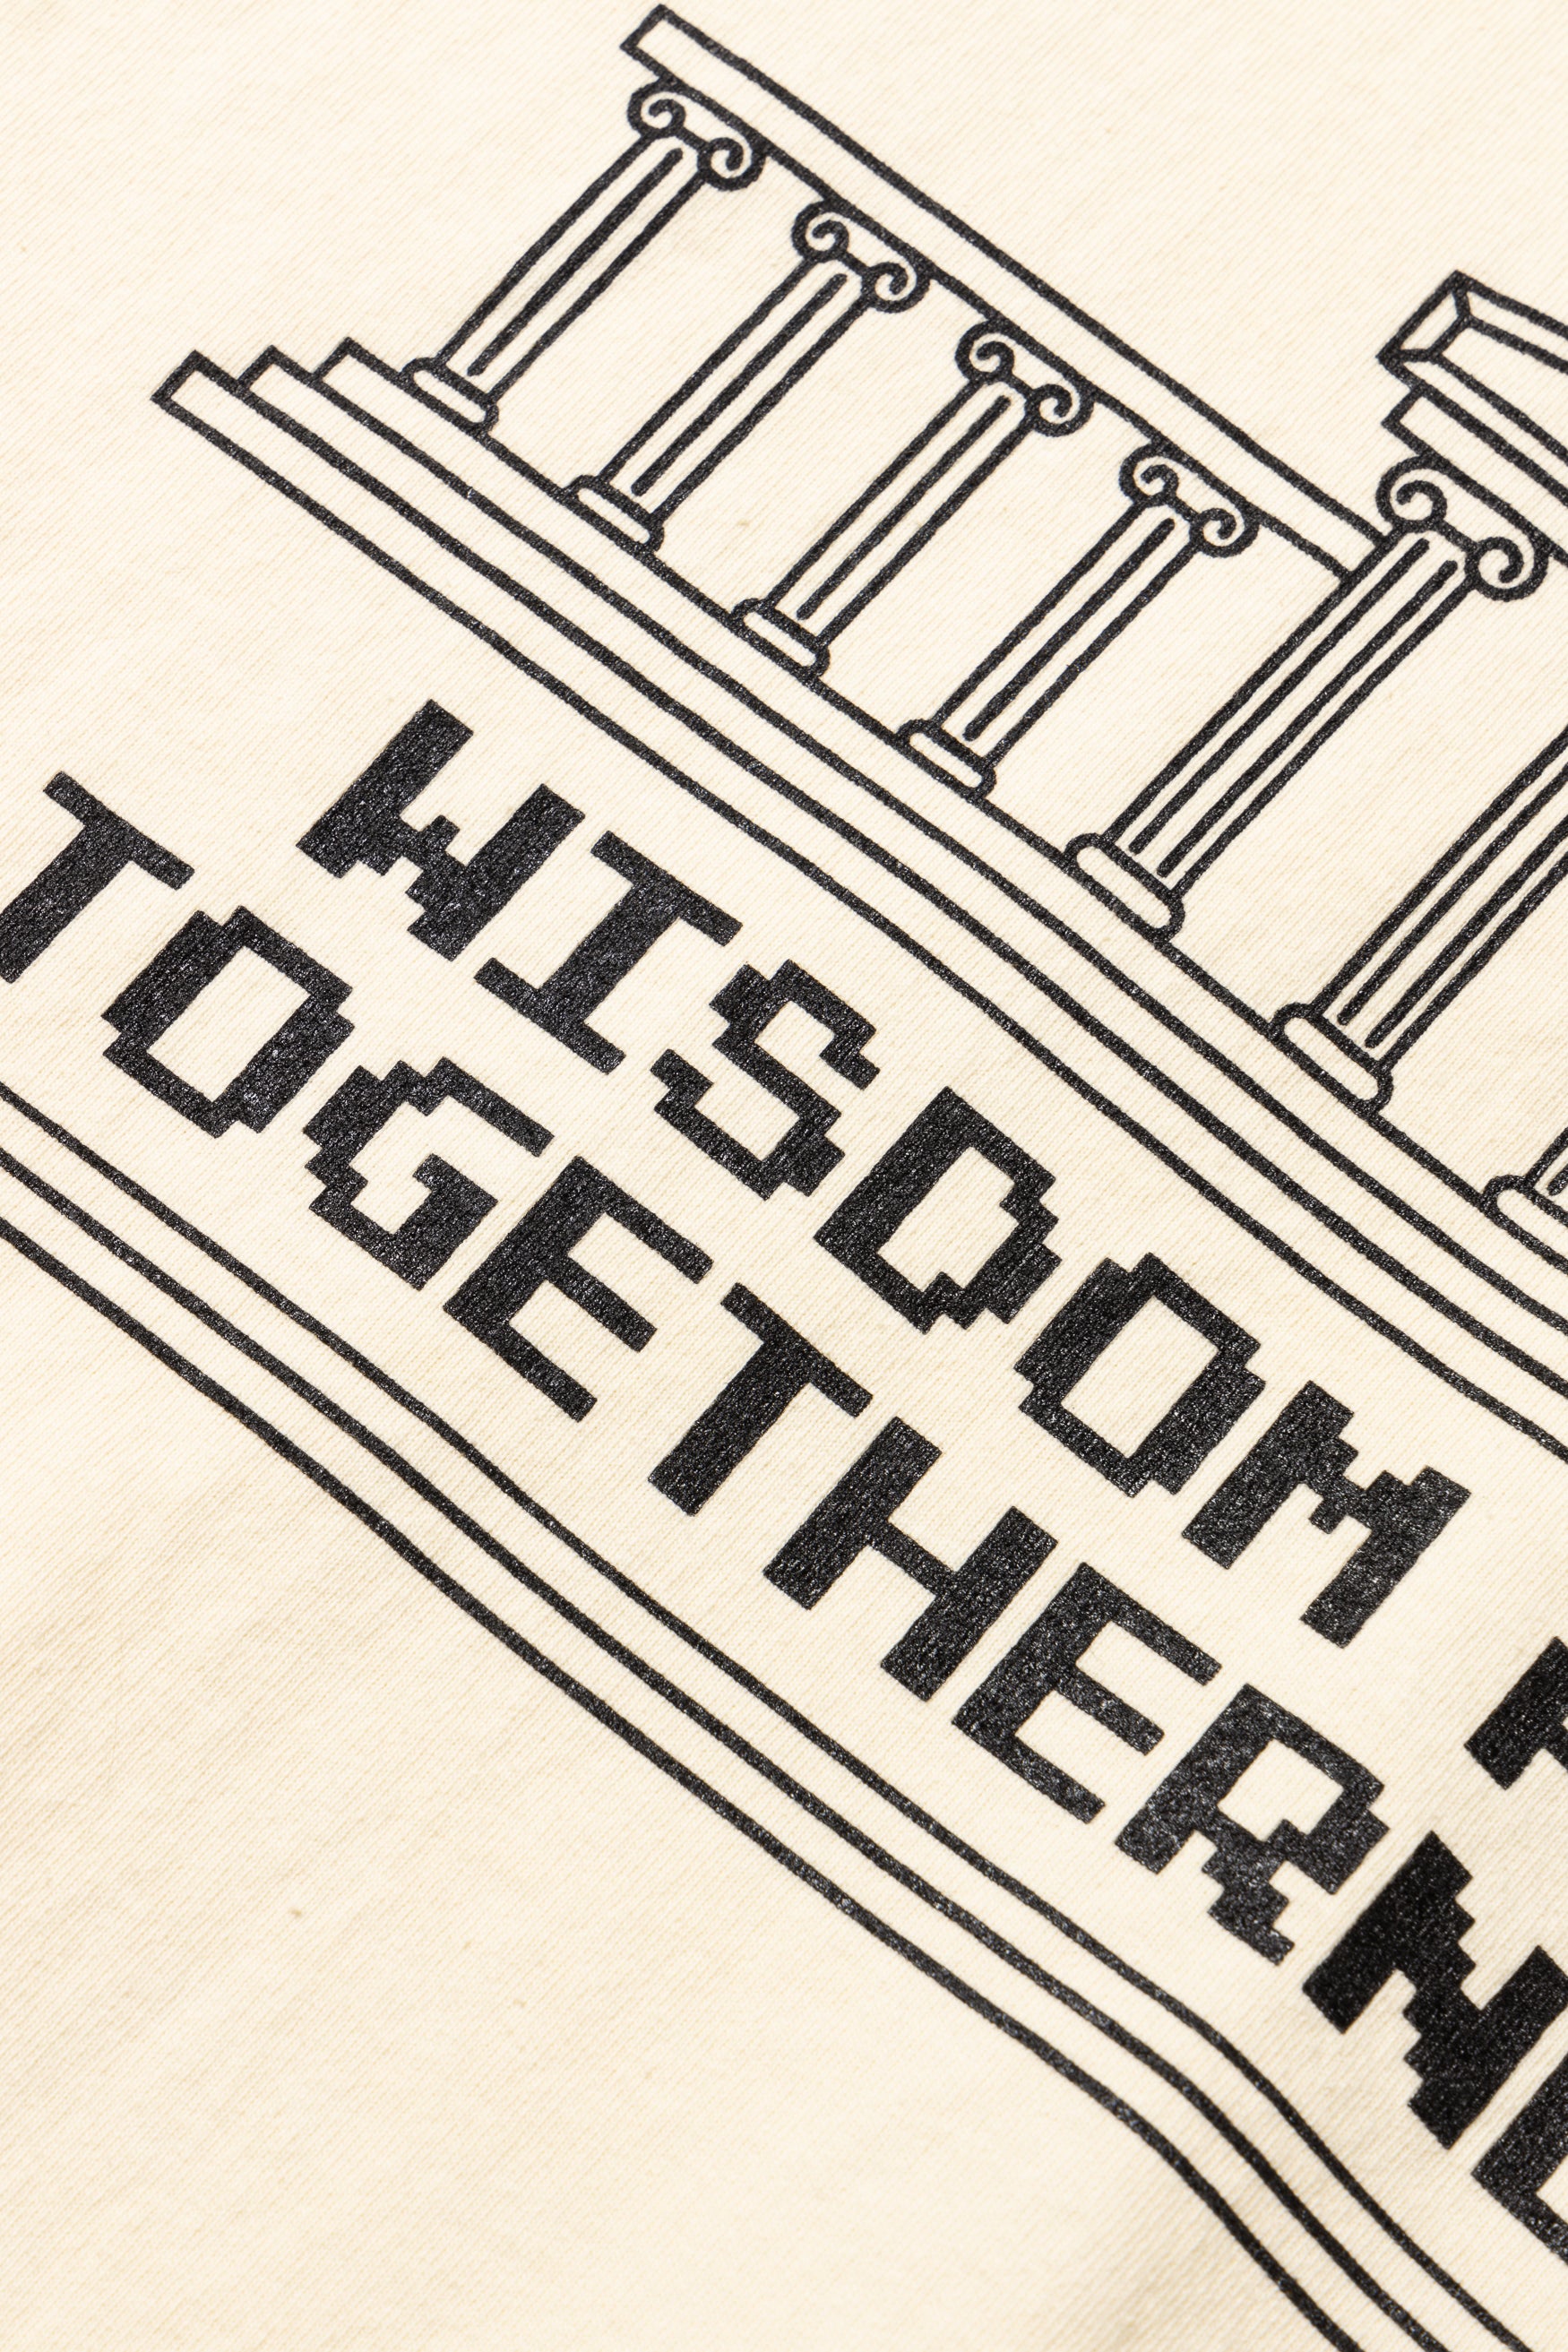 Load image into Gallery viewer, Wisdom and Togetherness SS Tee